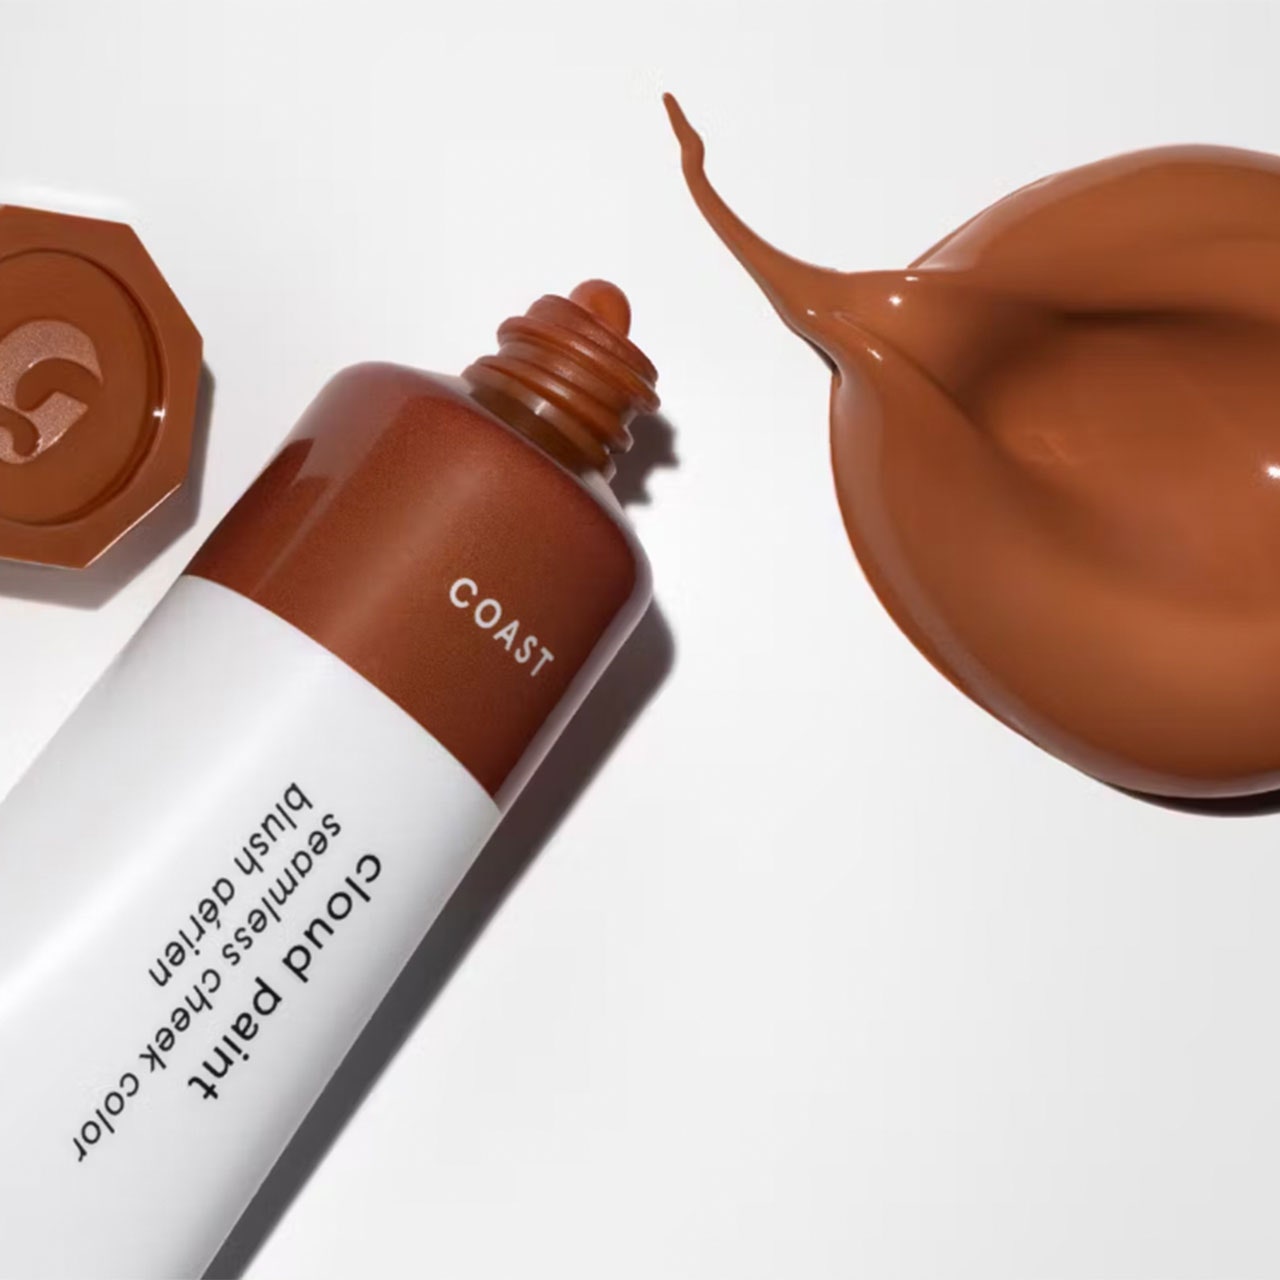 25 Glossier products that GLAMOUR editors are obsessed with